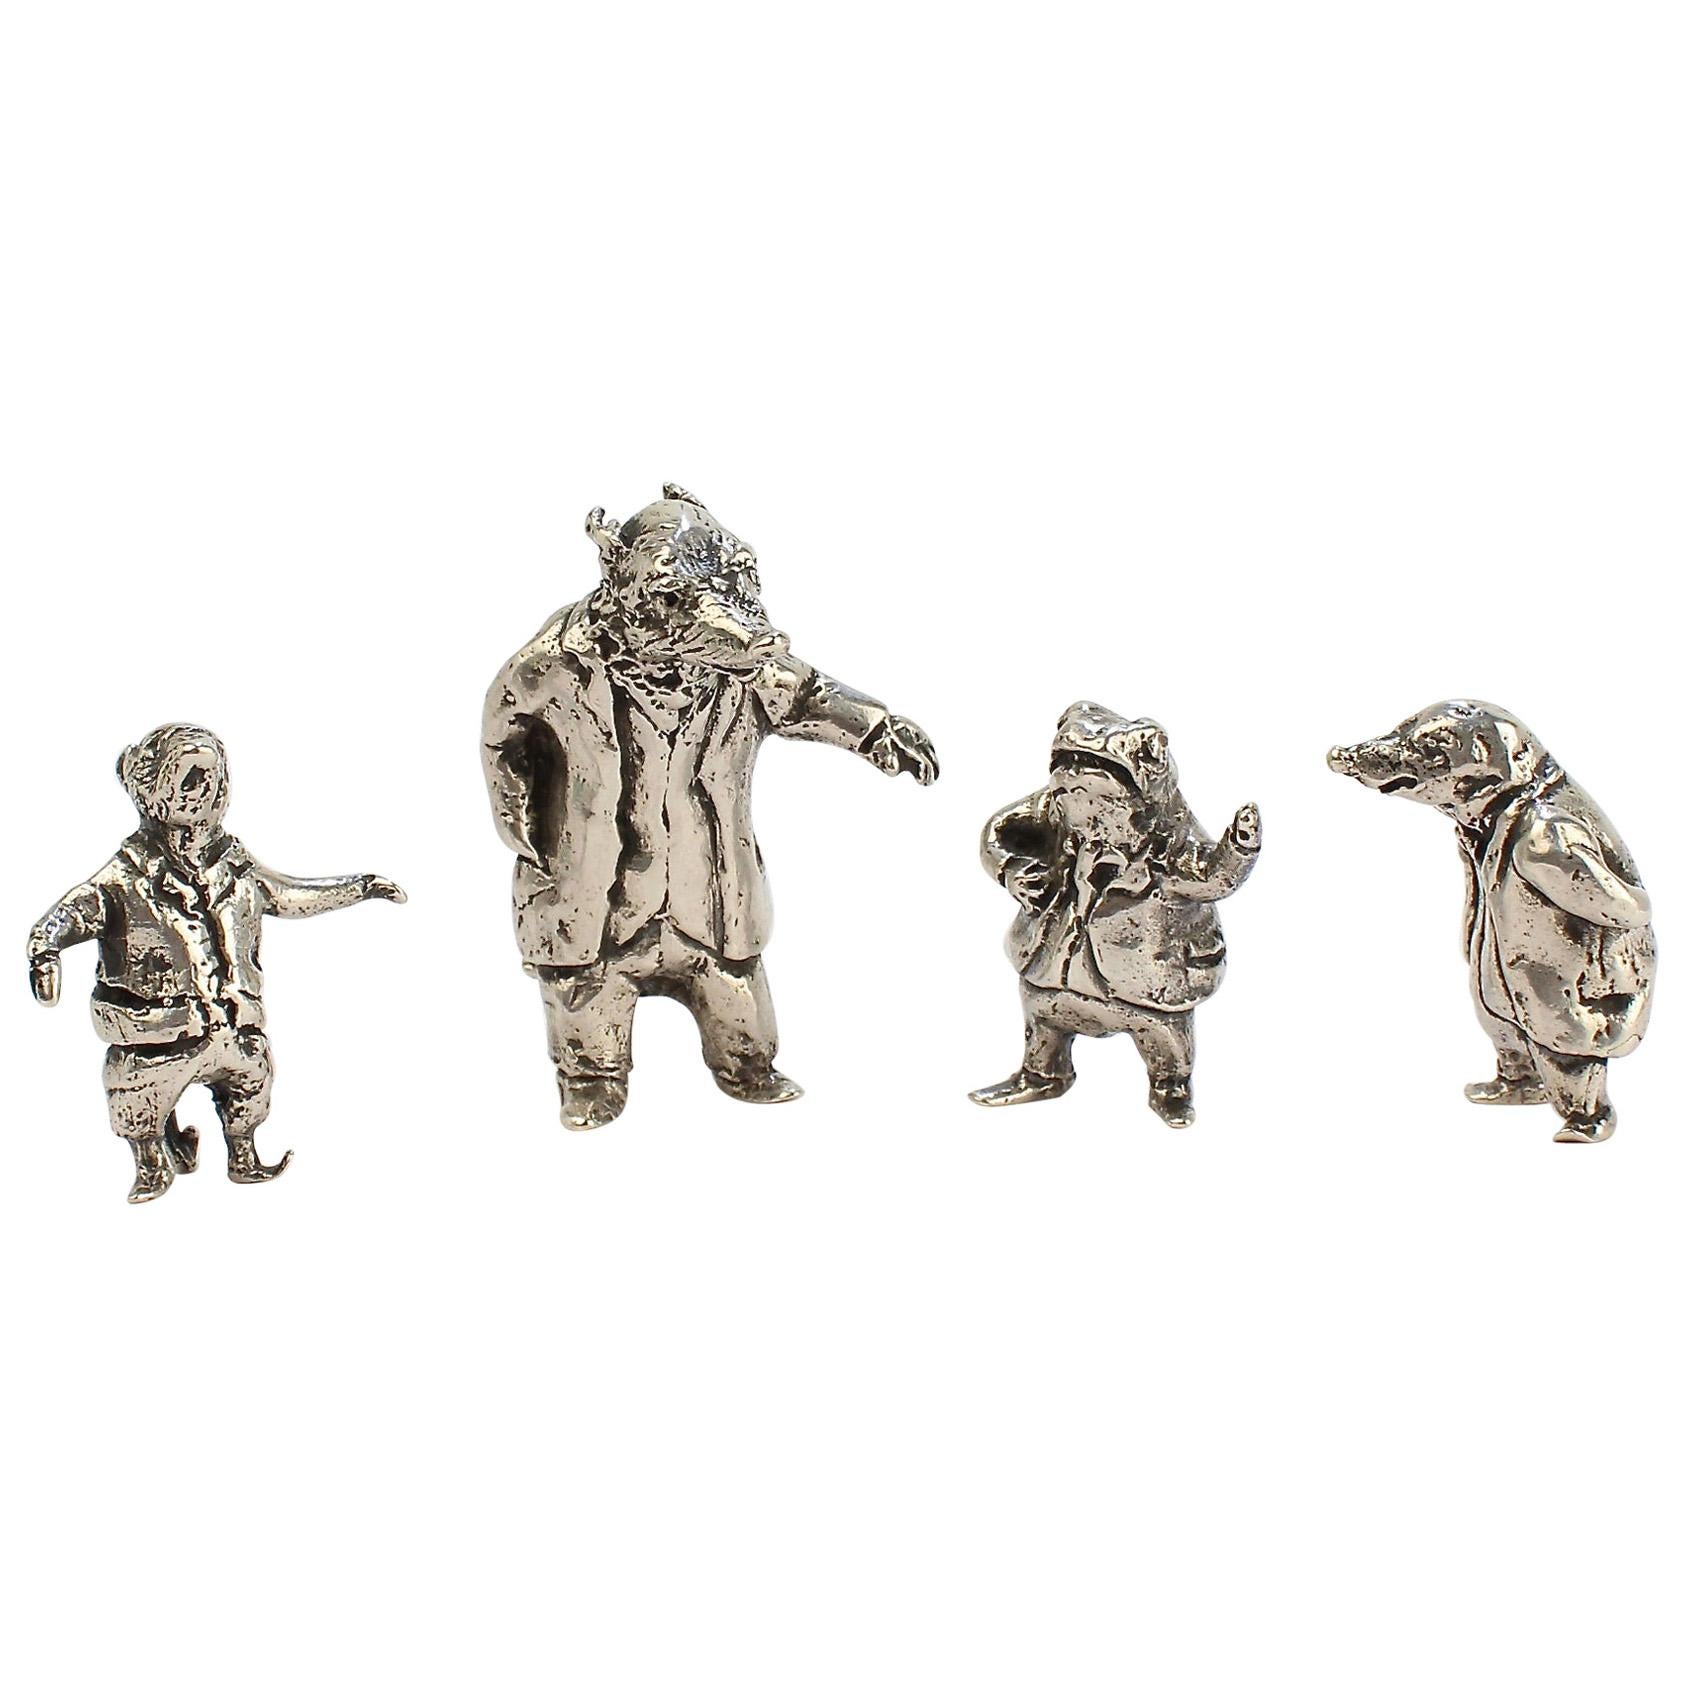 4 Miniature Sterling Silver Wind in the Willows Figures by Sterling E Lanier